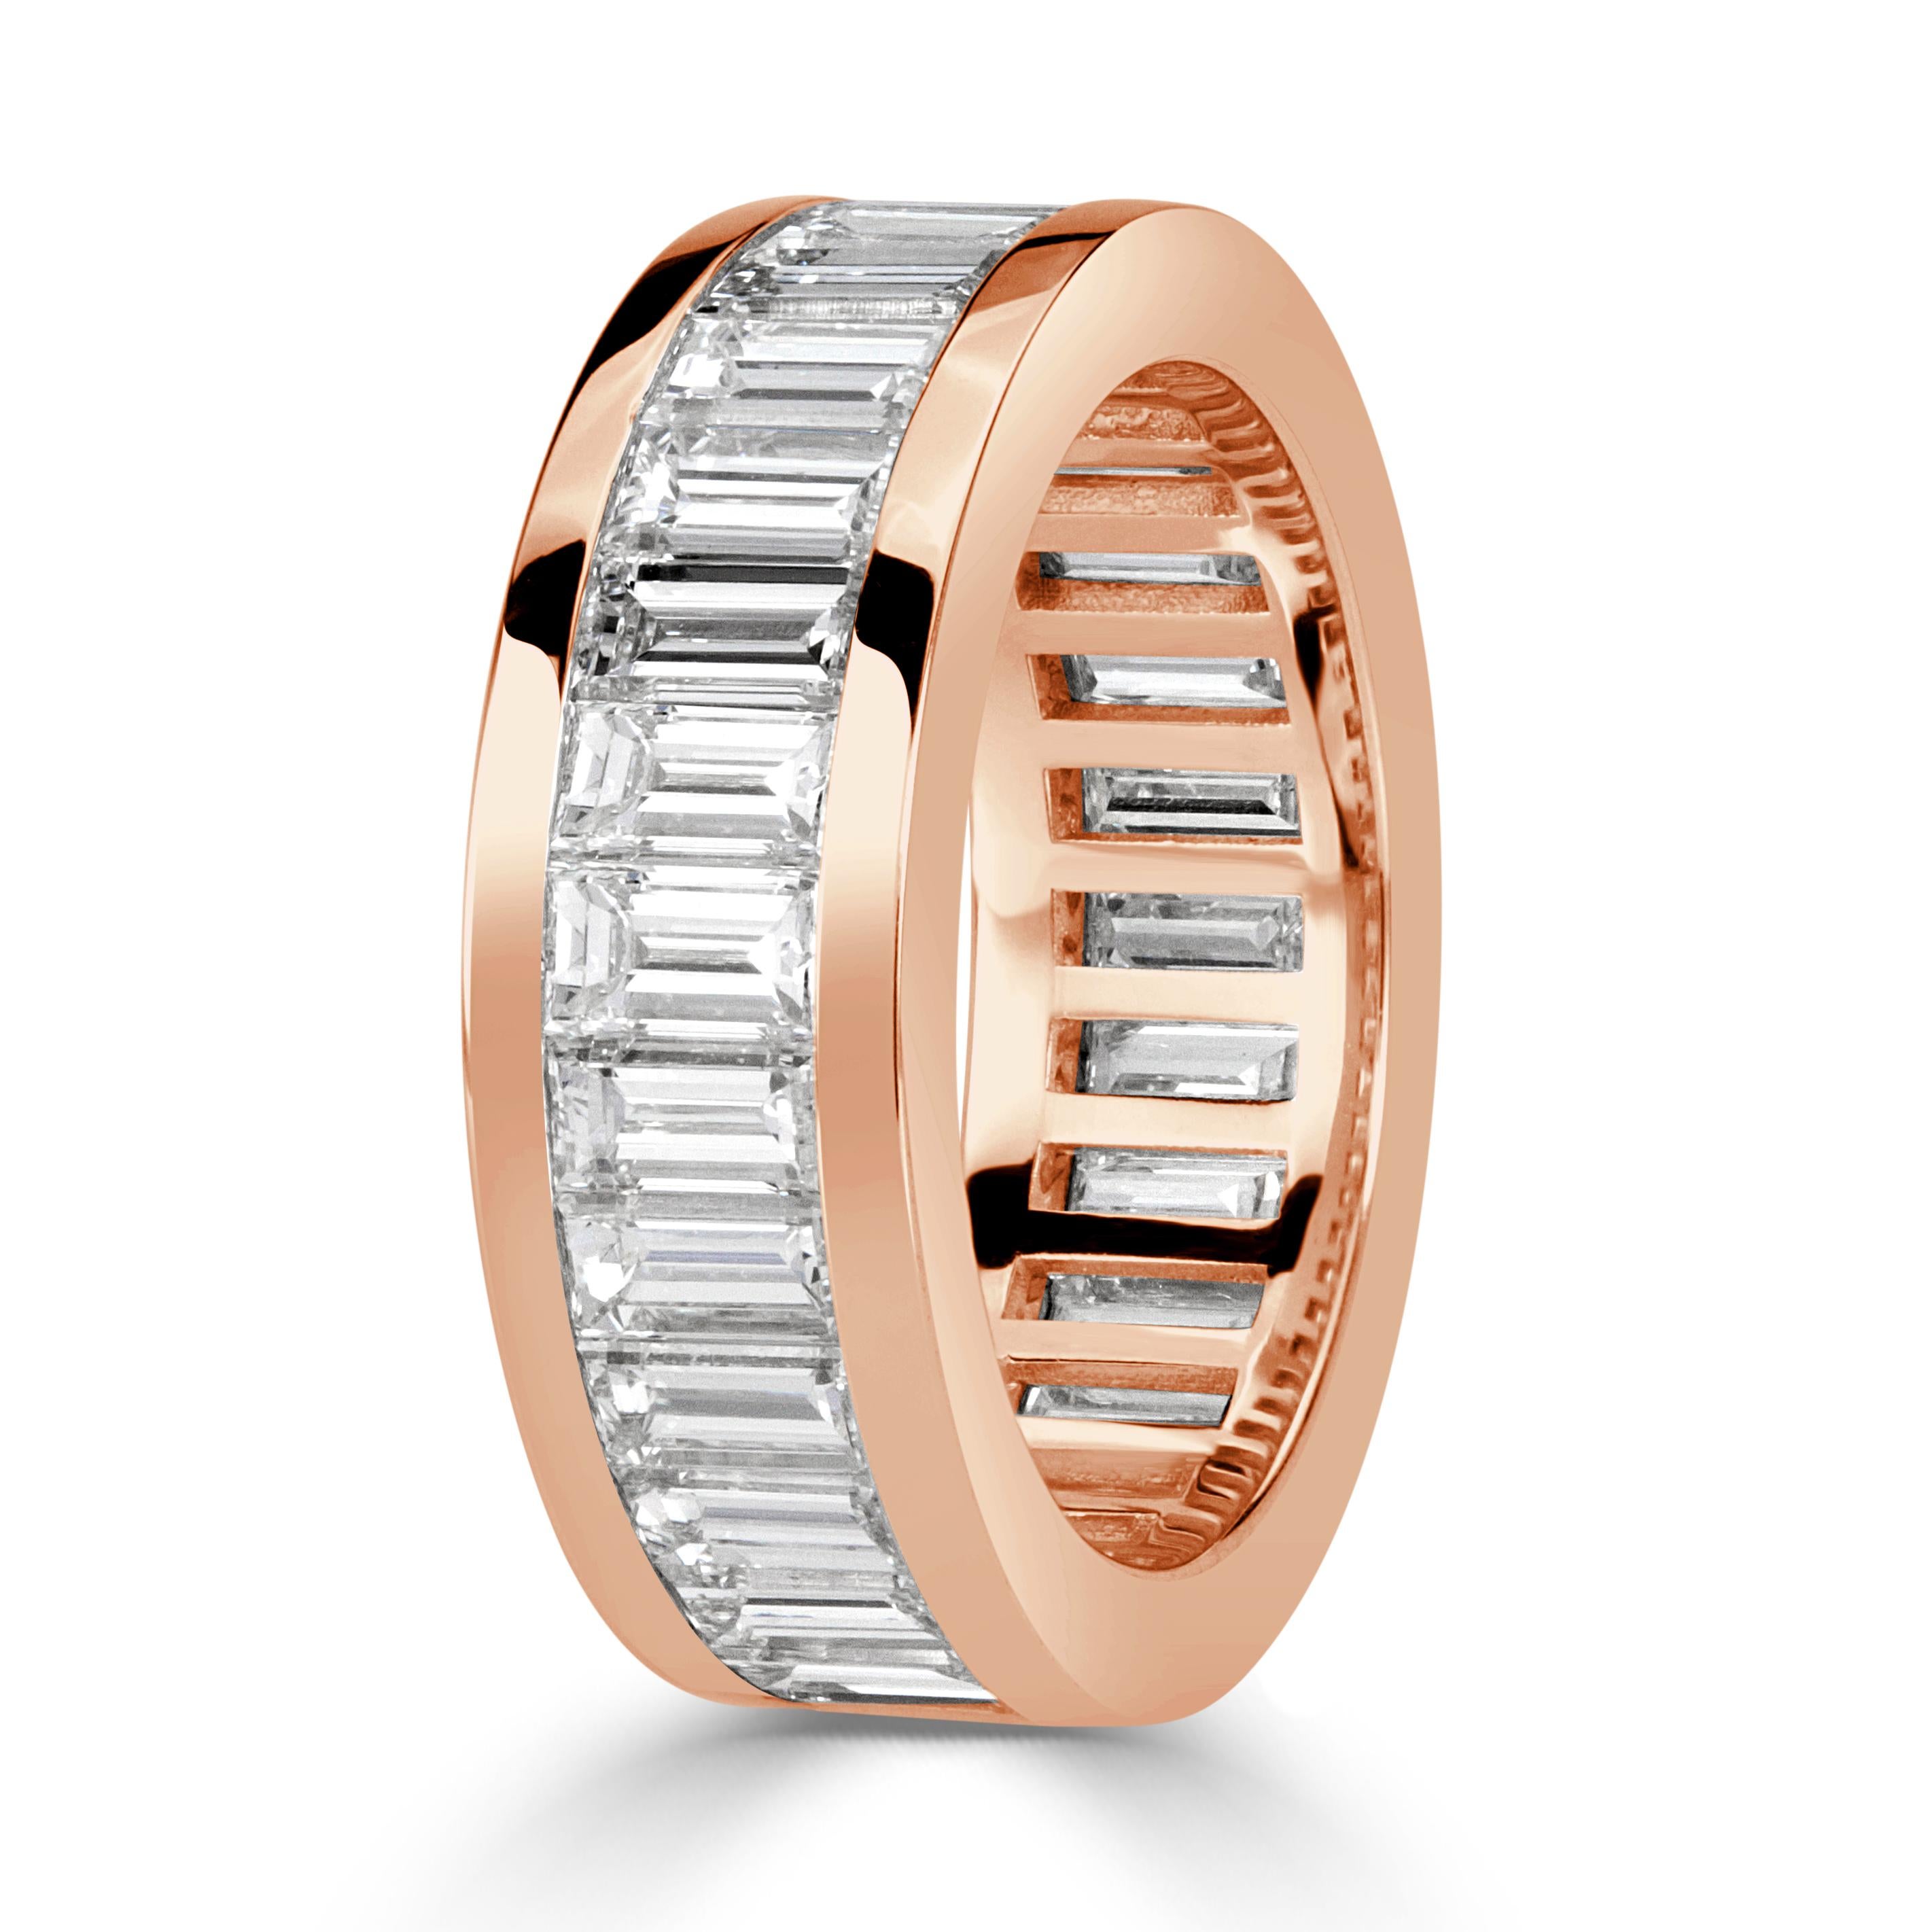 Custom created in 18k rose gold, this incredibly sleek eternity band features 4.97ct of channel set baguette cut diamonds graded at F-G, VVS2-VS1. They are incredibly white and clear with each of the diamonds being hand selected by Mark Broumand